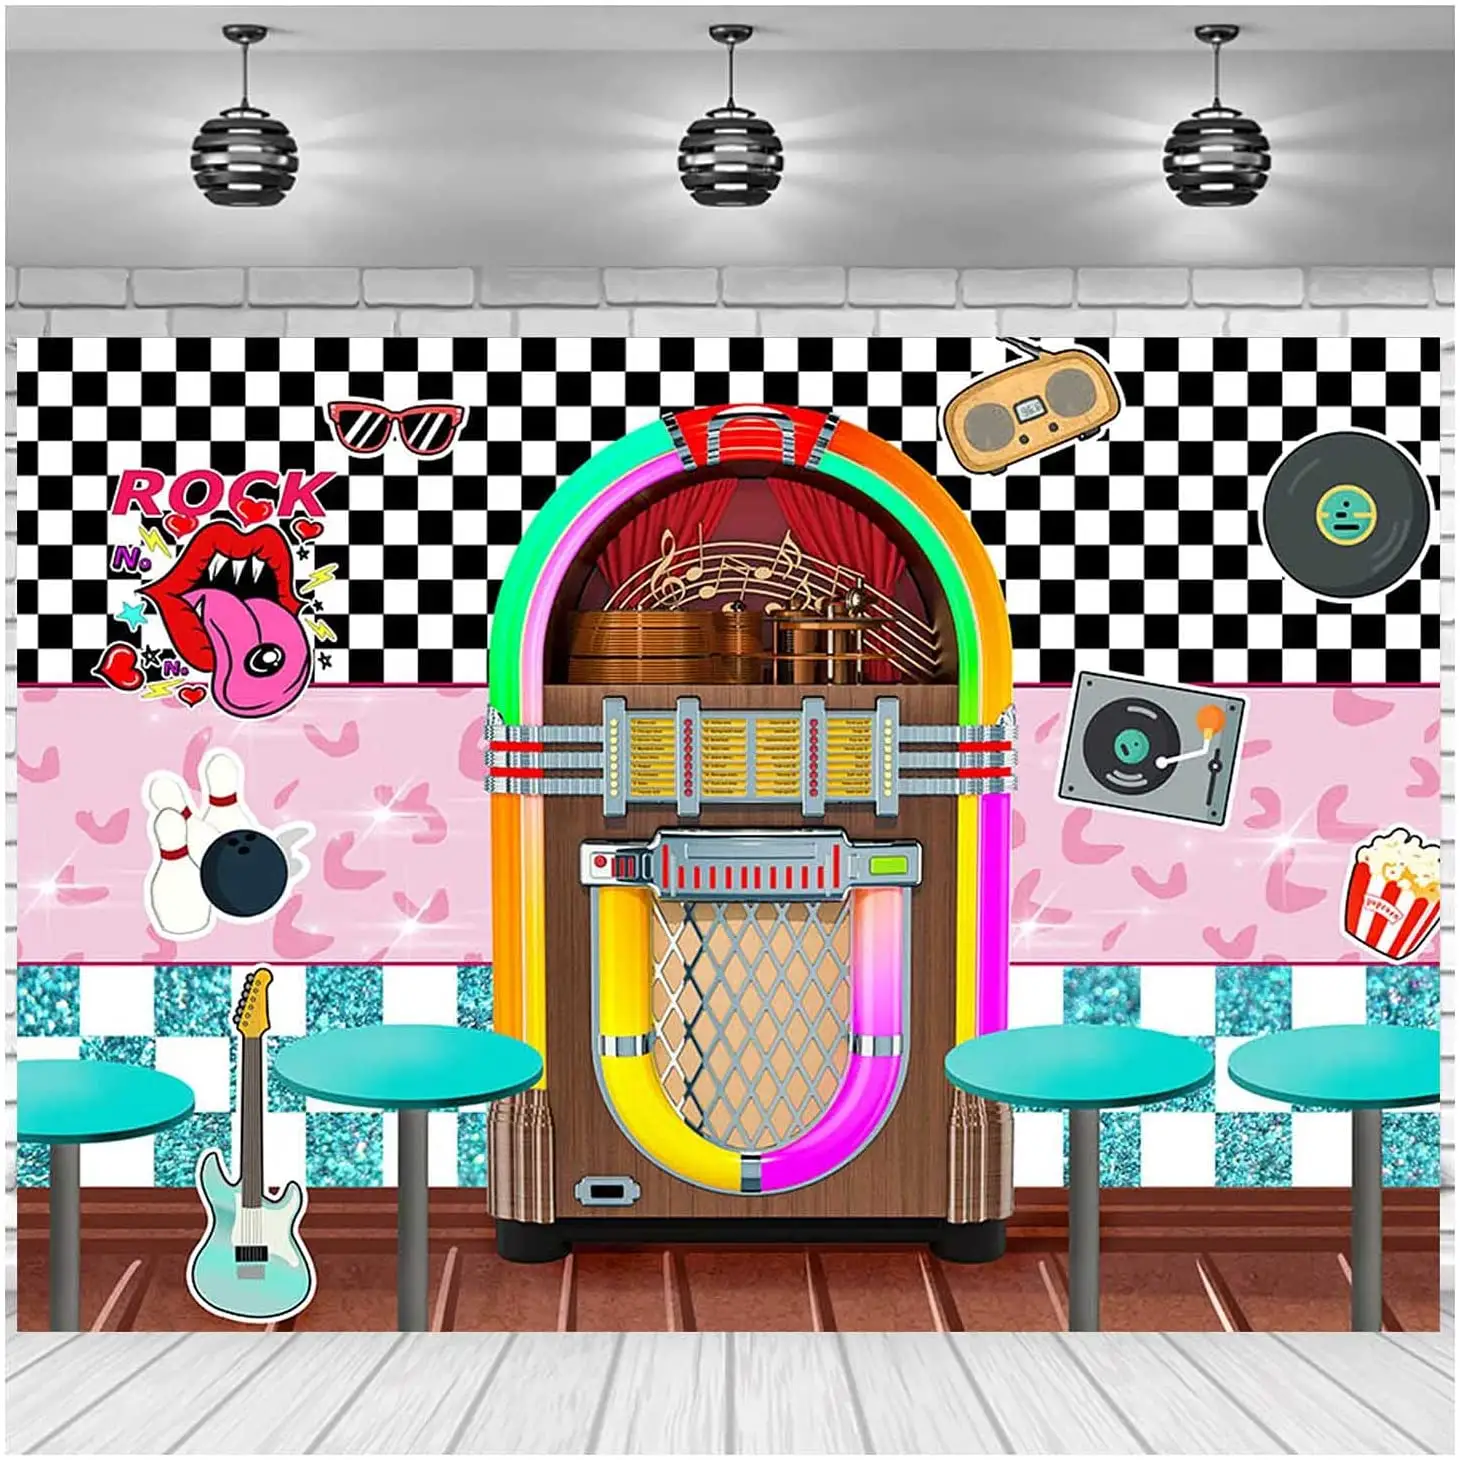 Rock Roll Party Back to 50's Sock Hop Photography Background Back to 1950s Soda Shop Photo Backdrops 50s Retro Diner Time Rock R